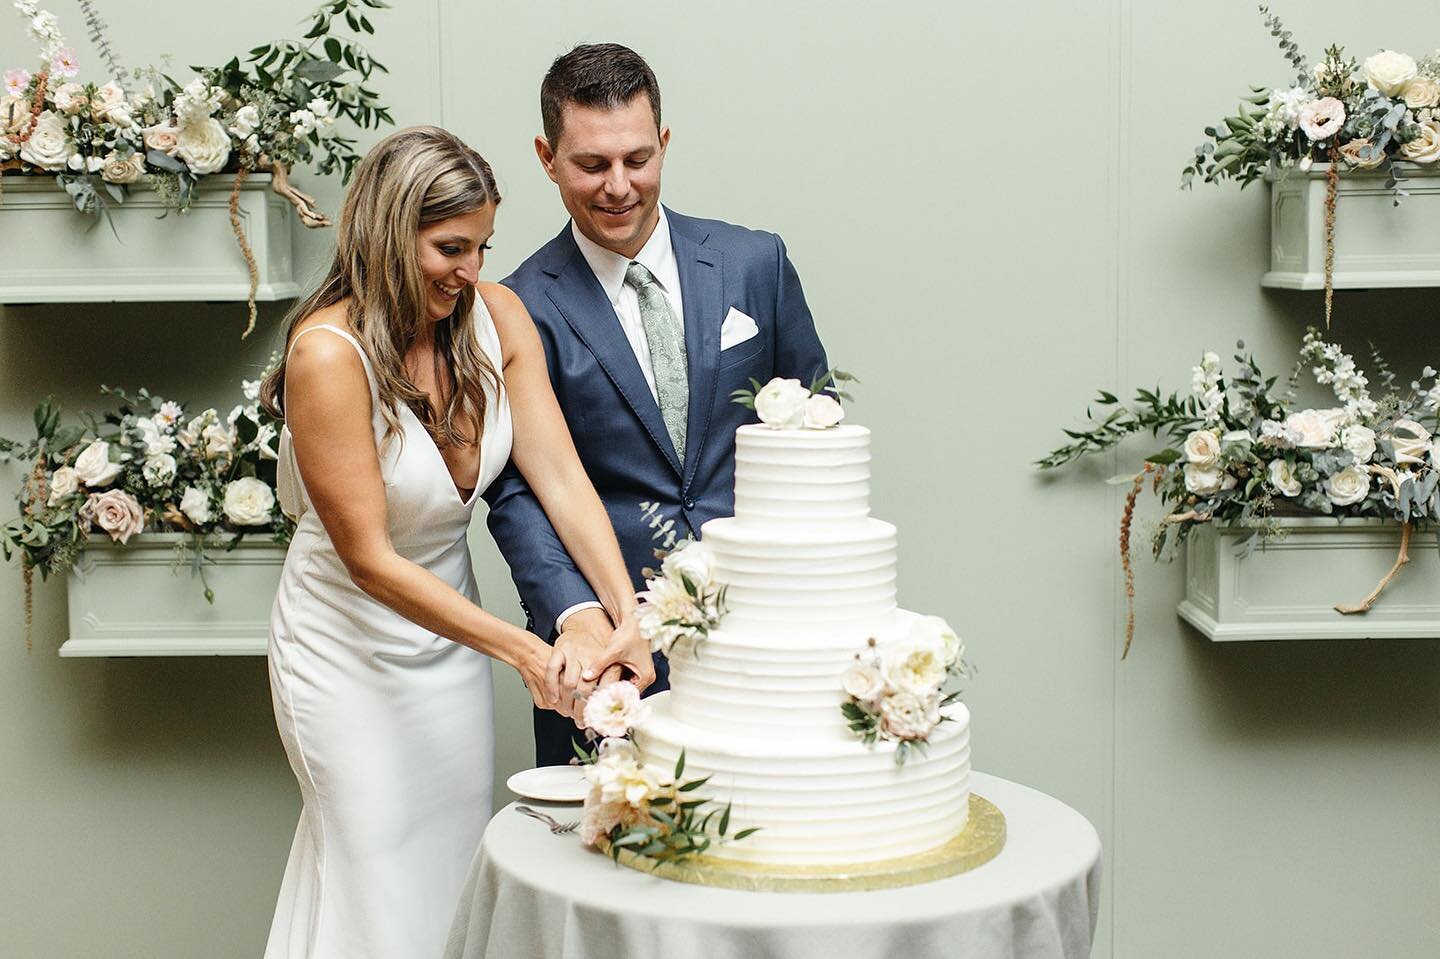 The perfect cake-cutting backdrop. 

Plan &amp; Design @Wildflowereventsdesign 
Photographer @scarletroots
Videographer @stopgolove 
Florist @homegrown_blooms_ 
Invitations &amp; Day of Signage @cat_wilcox 
Escort Board &amp; Photo Wall @bostonbackdr